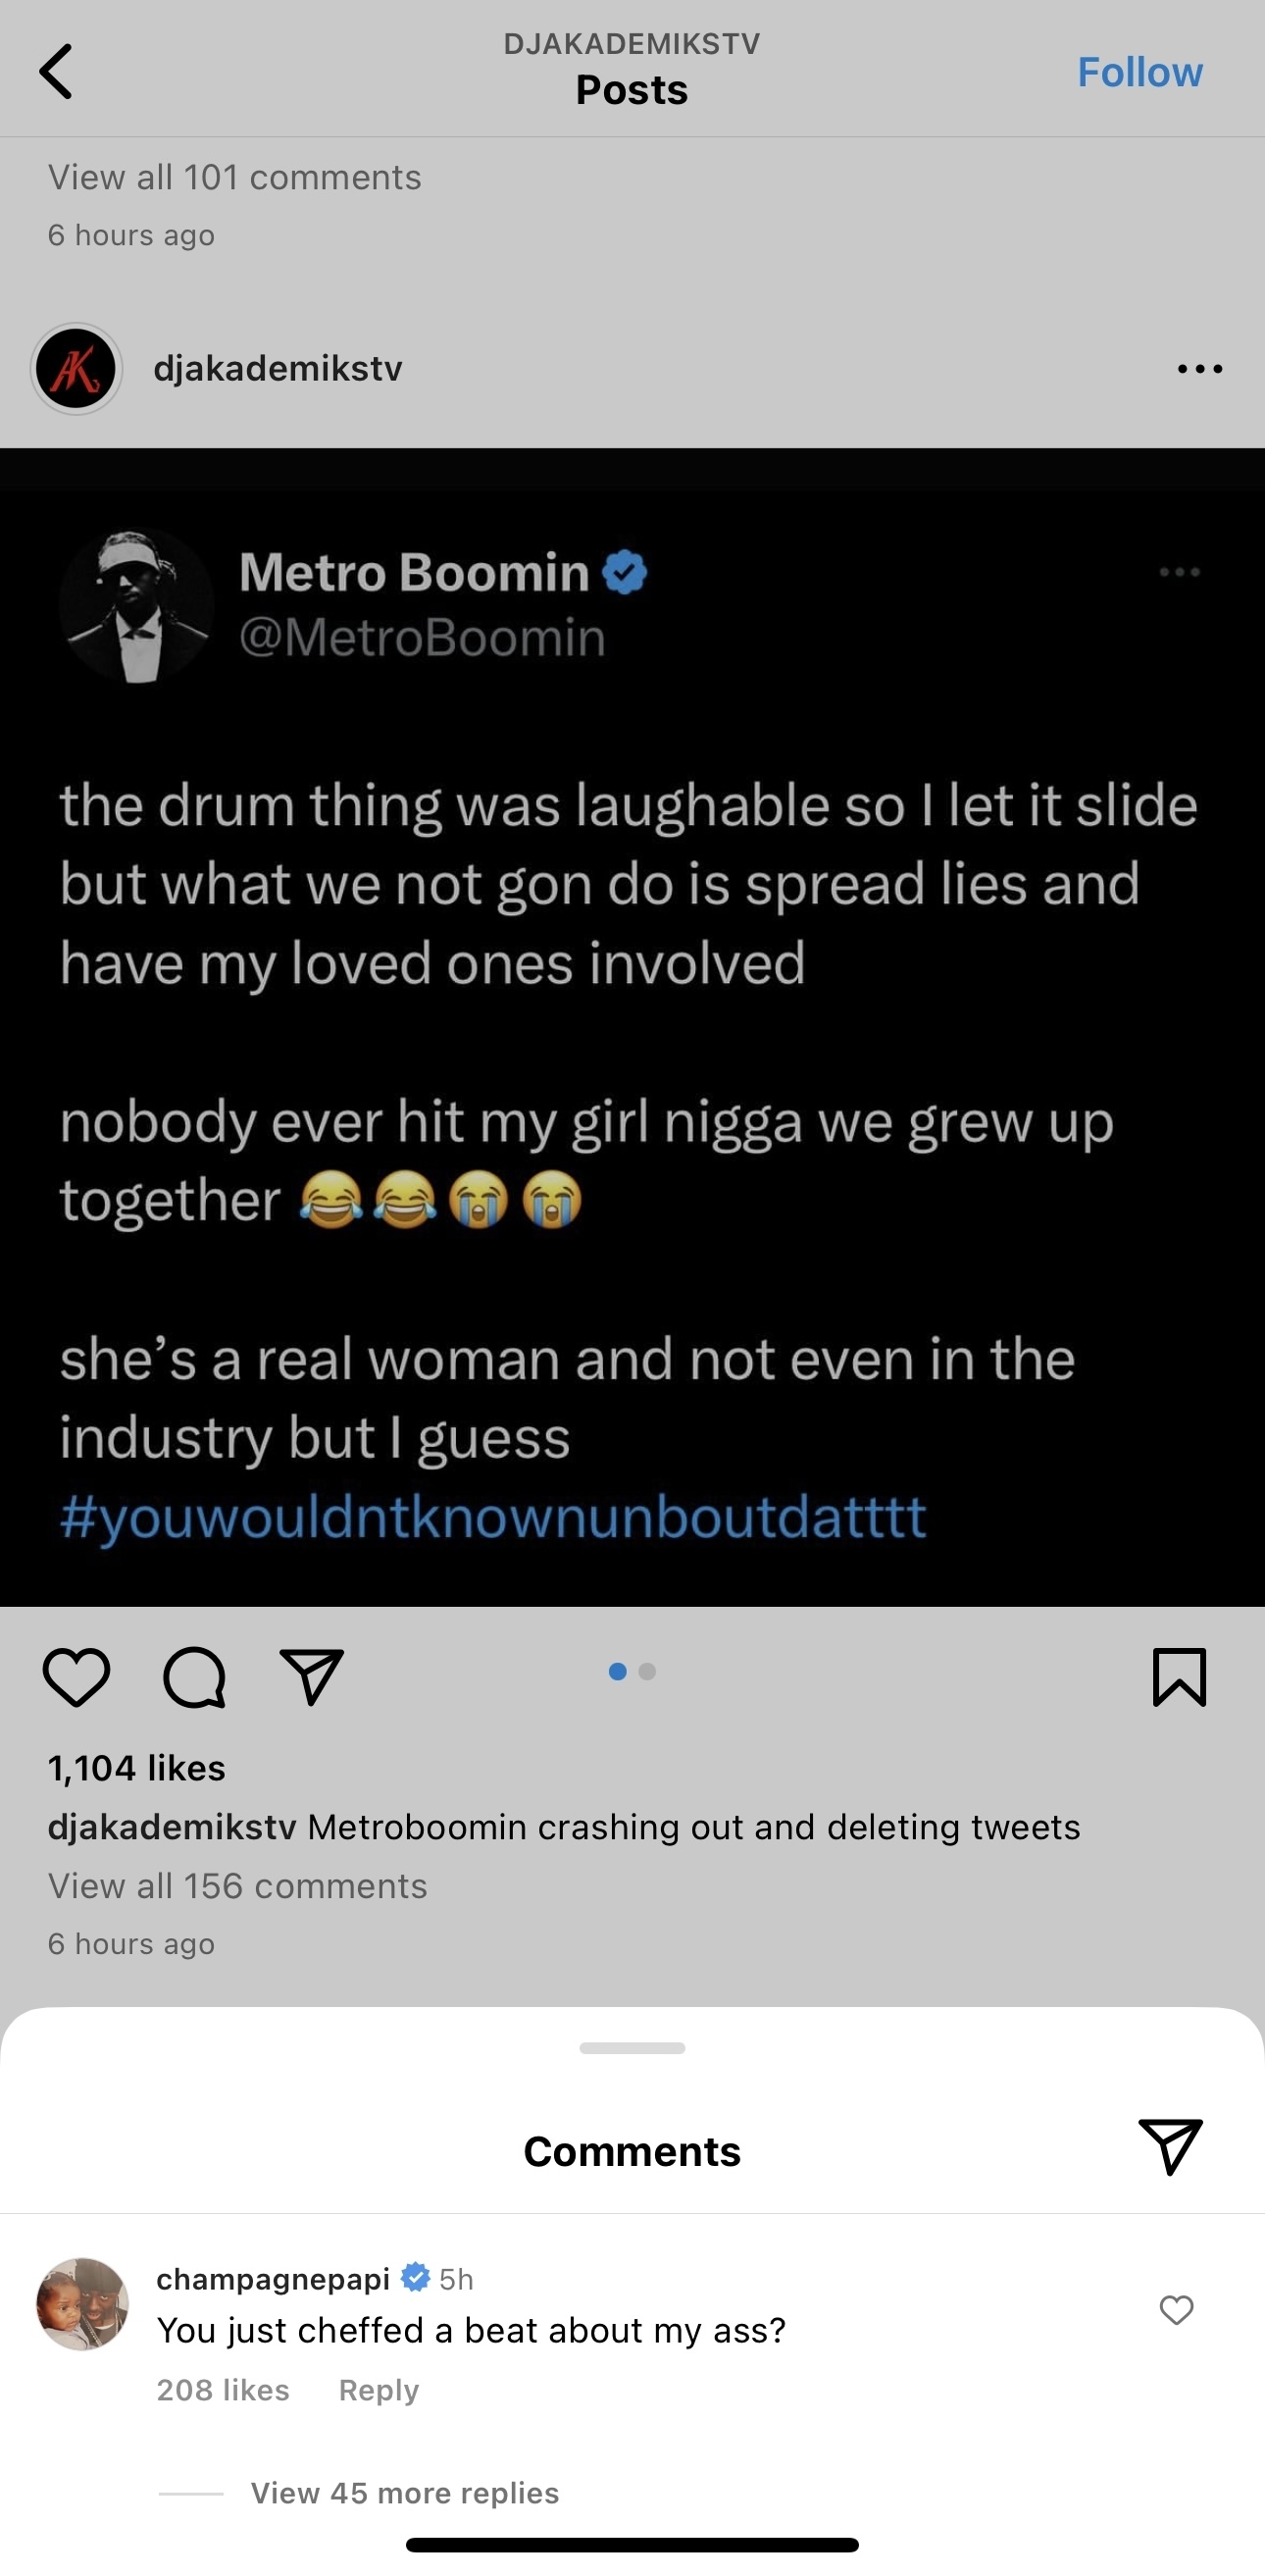 Screenshot of a tweet by MetroBoomin with comments visible below, discussing personal matters and industry experience